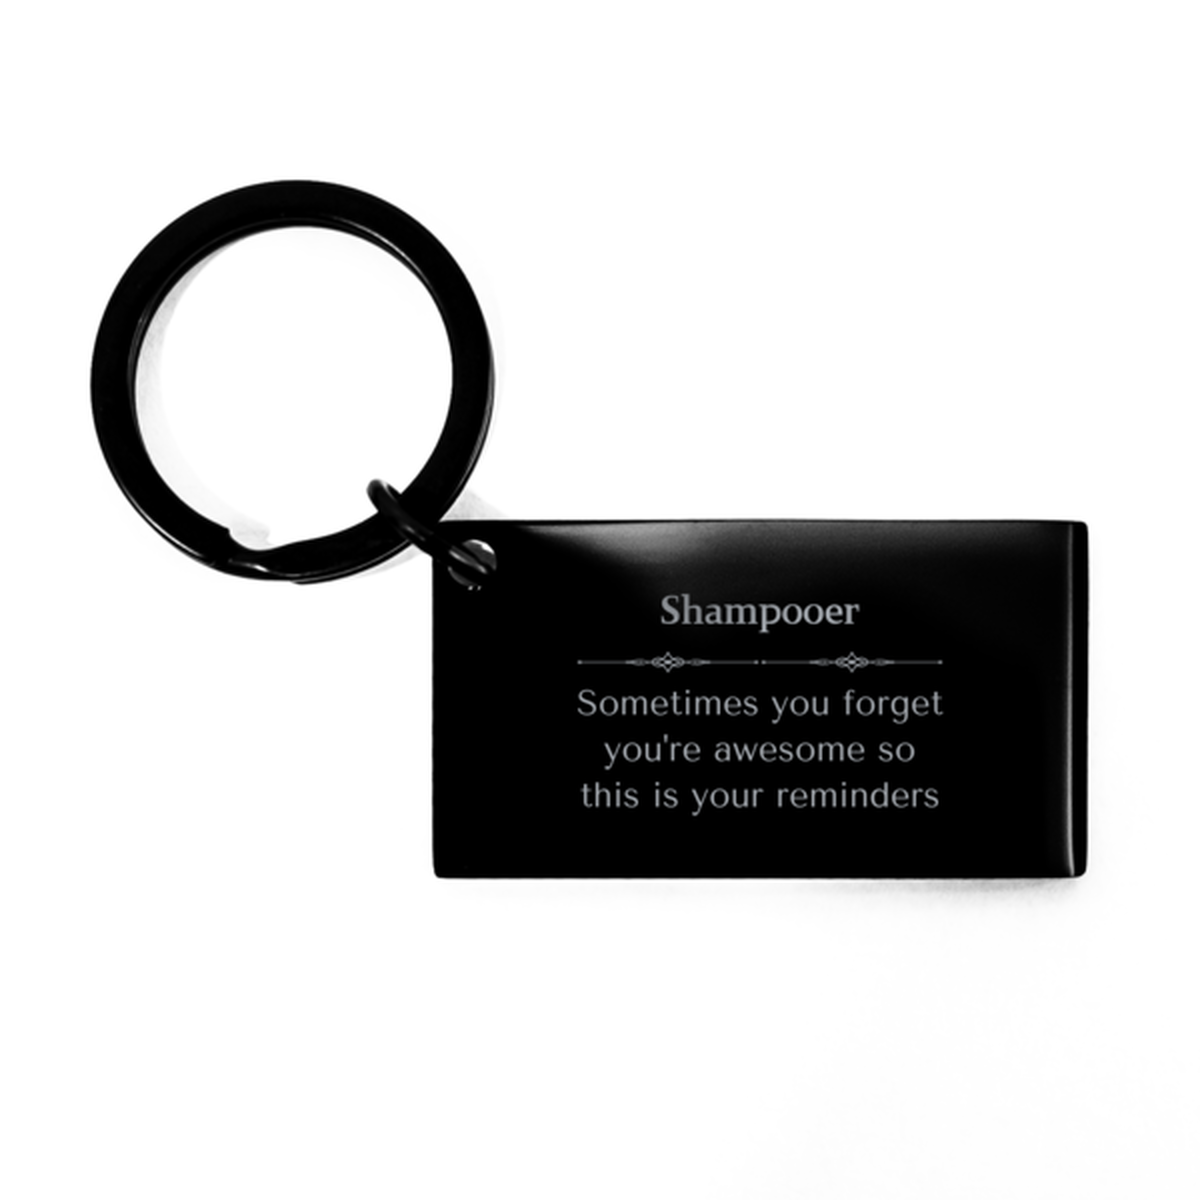 Sentimental Shampooer Keychain, Veterinary Assistant Sometimes you forget you're awesome so this is your reminders, Graduation Christmas Birthday Gifts for Shampooer, Men, Women, Coworkers